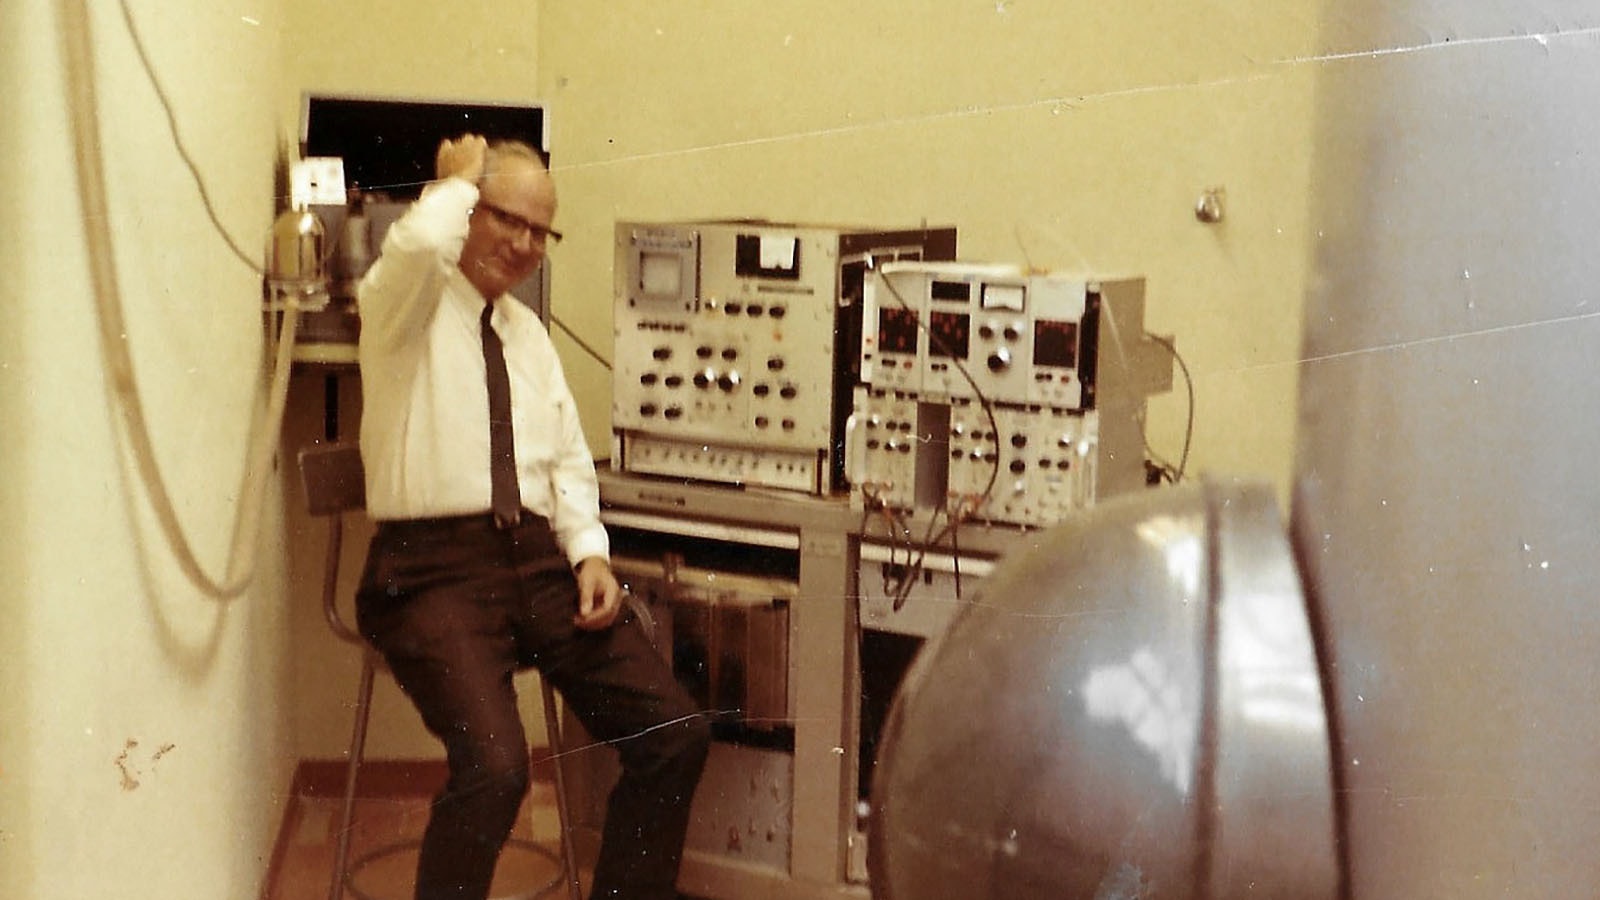 Dr. Victor Ryan in the small control room of the tiny nuclear reactor he brought to the University of Wyoming and was kept in the basement of the old engineering building.